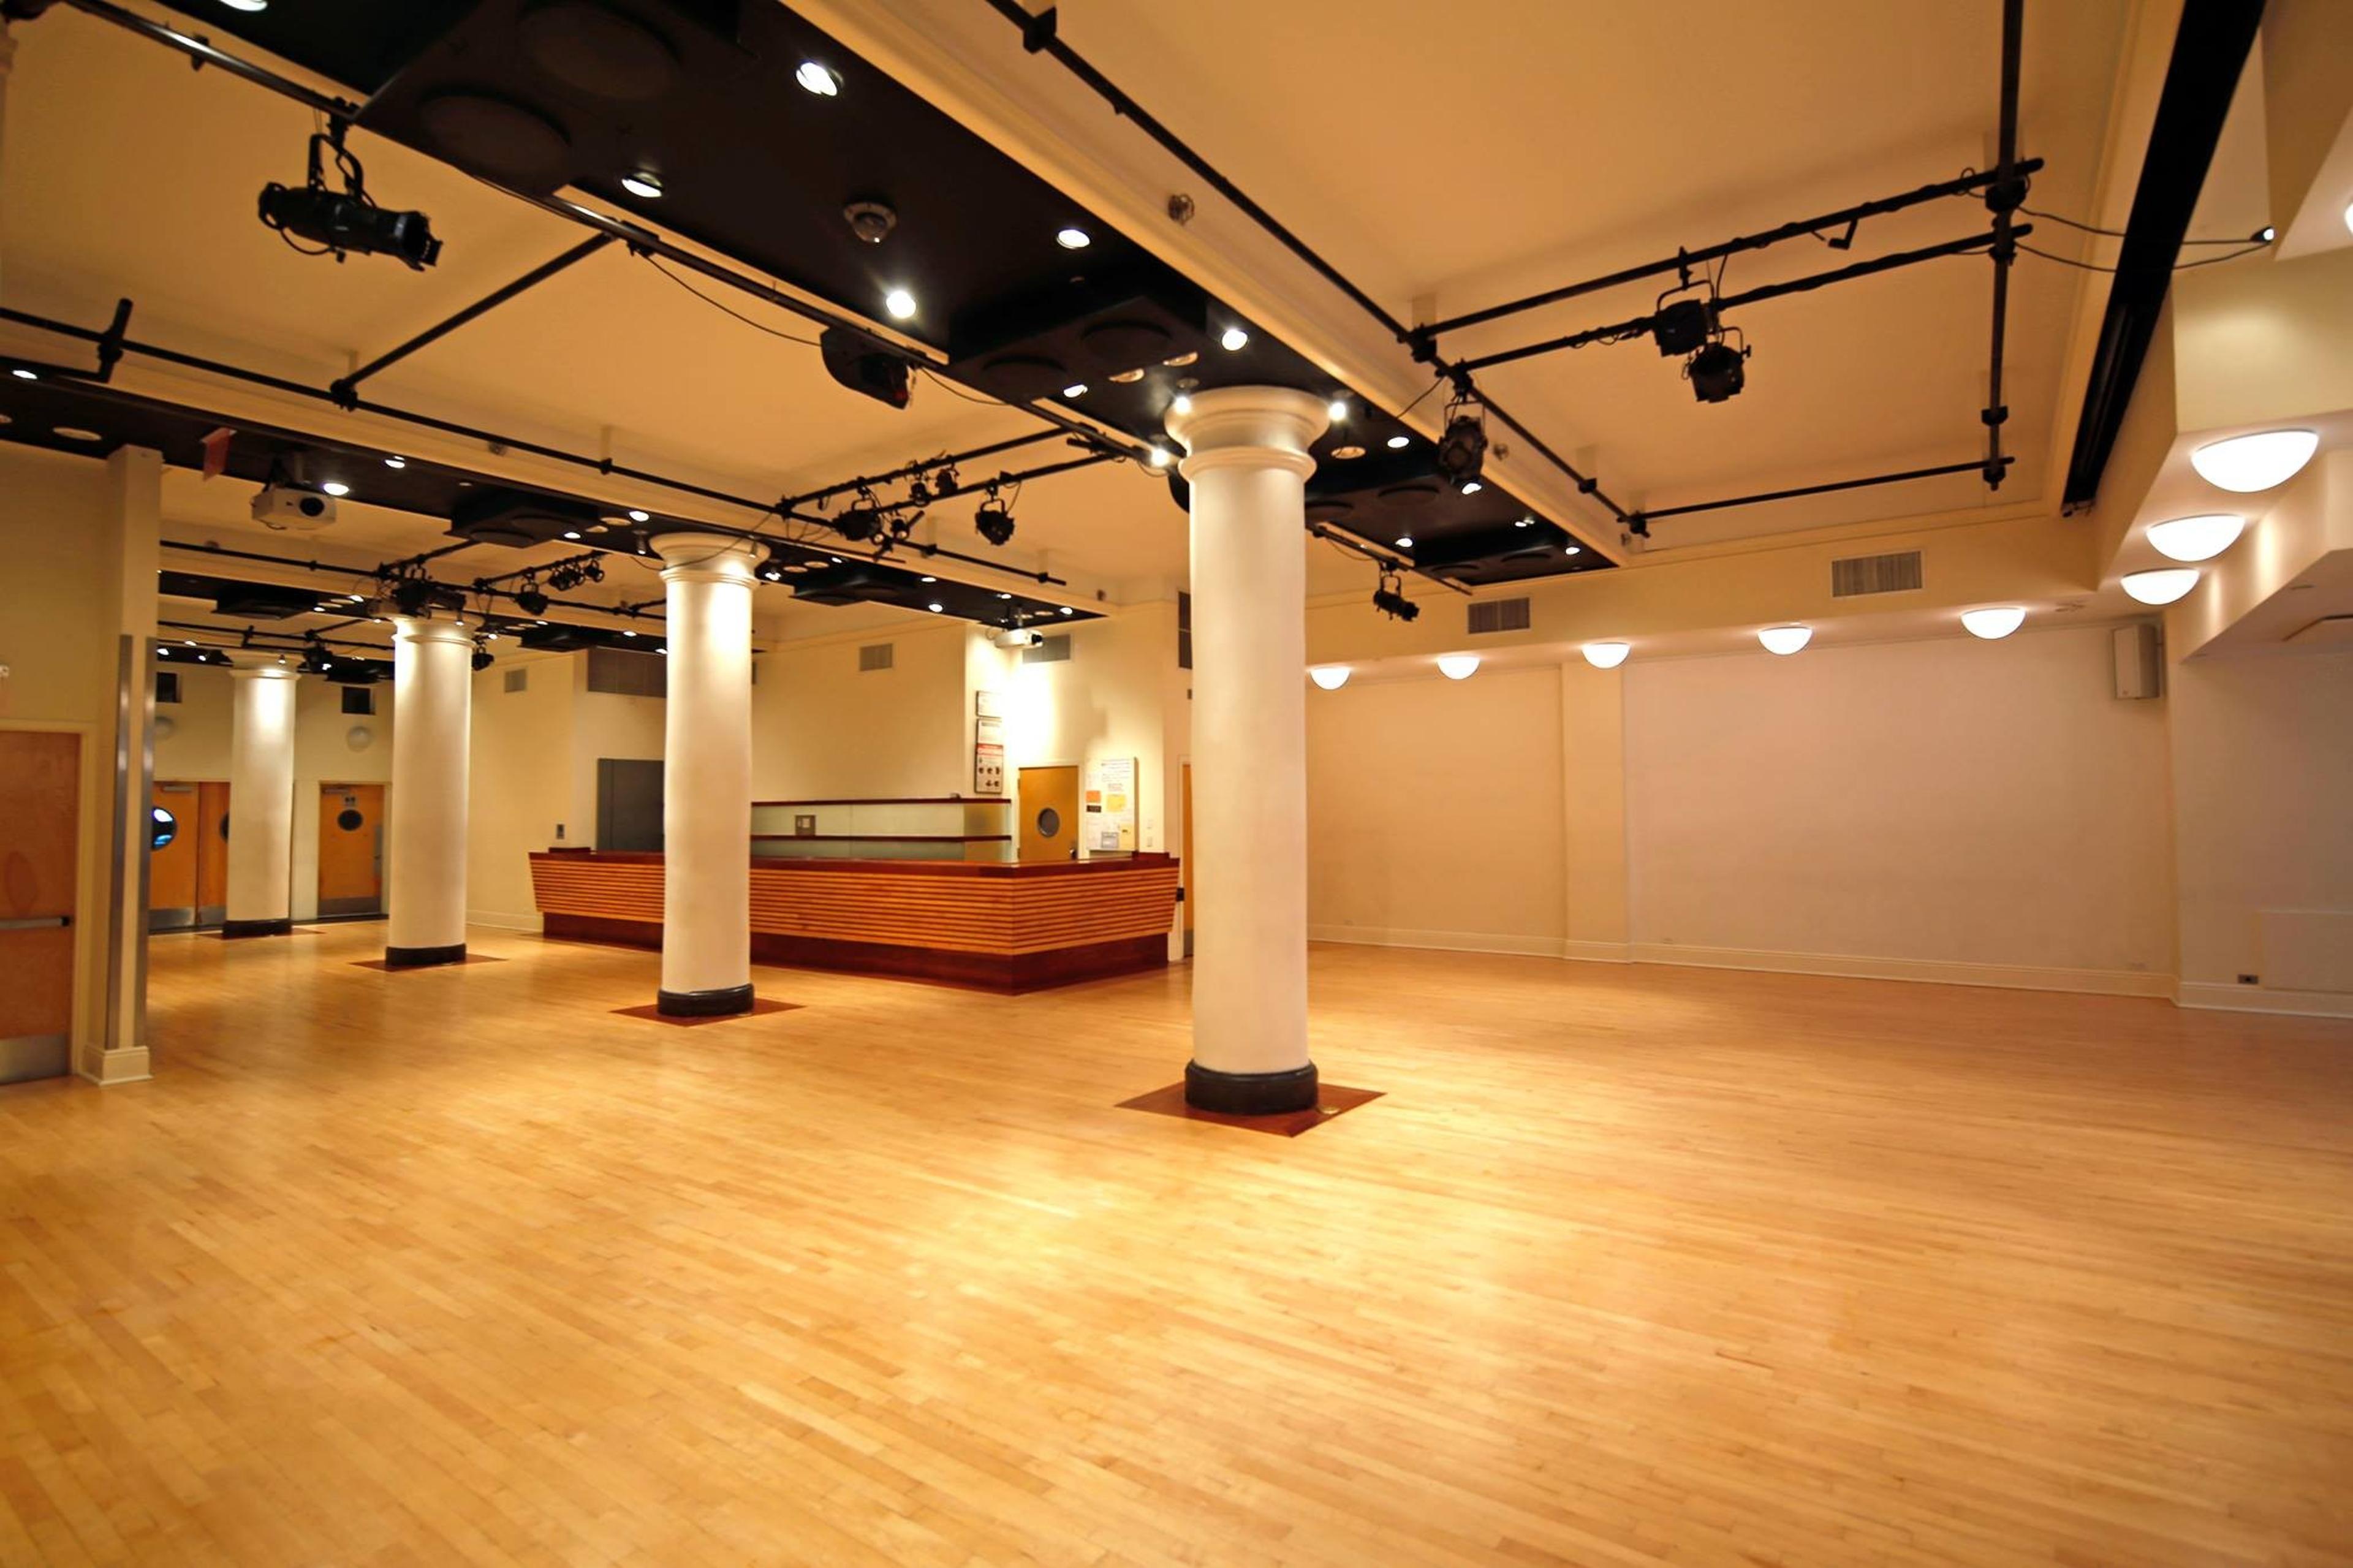 Helen Mills Event Space and Theater